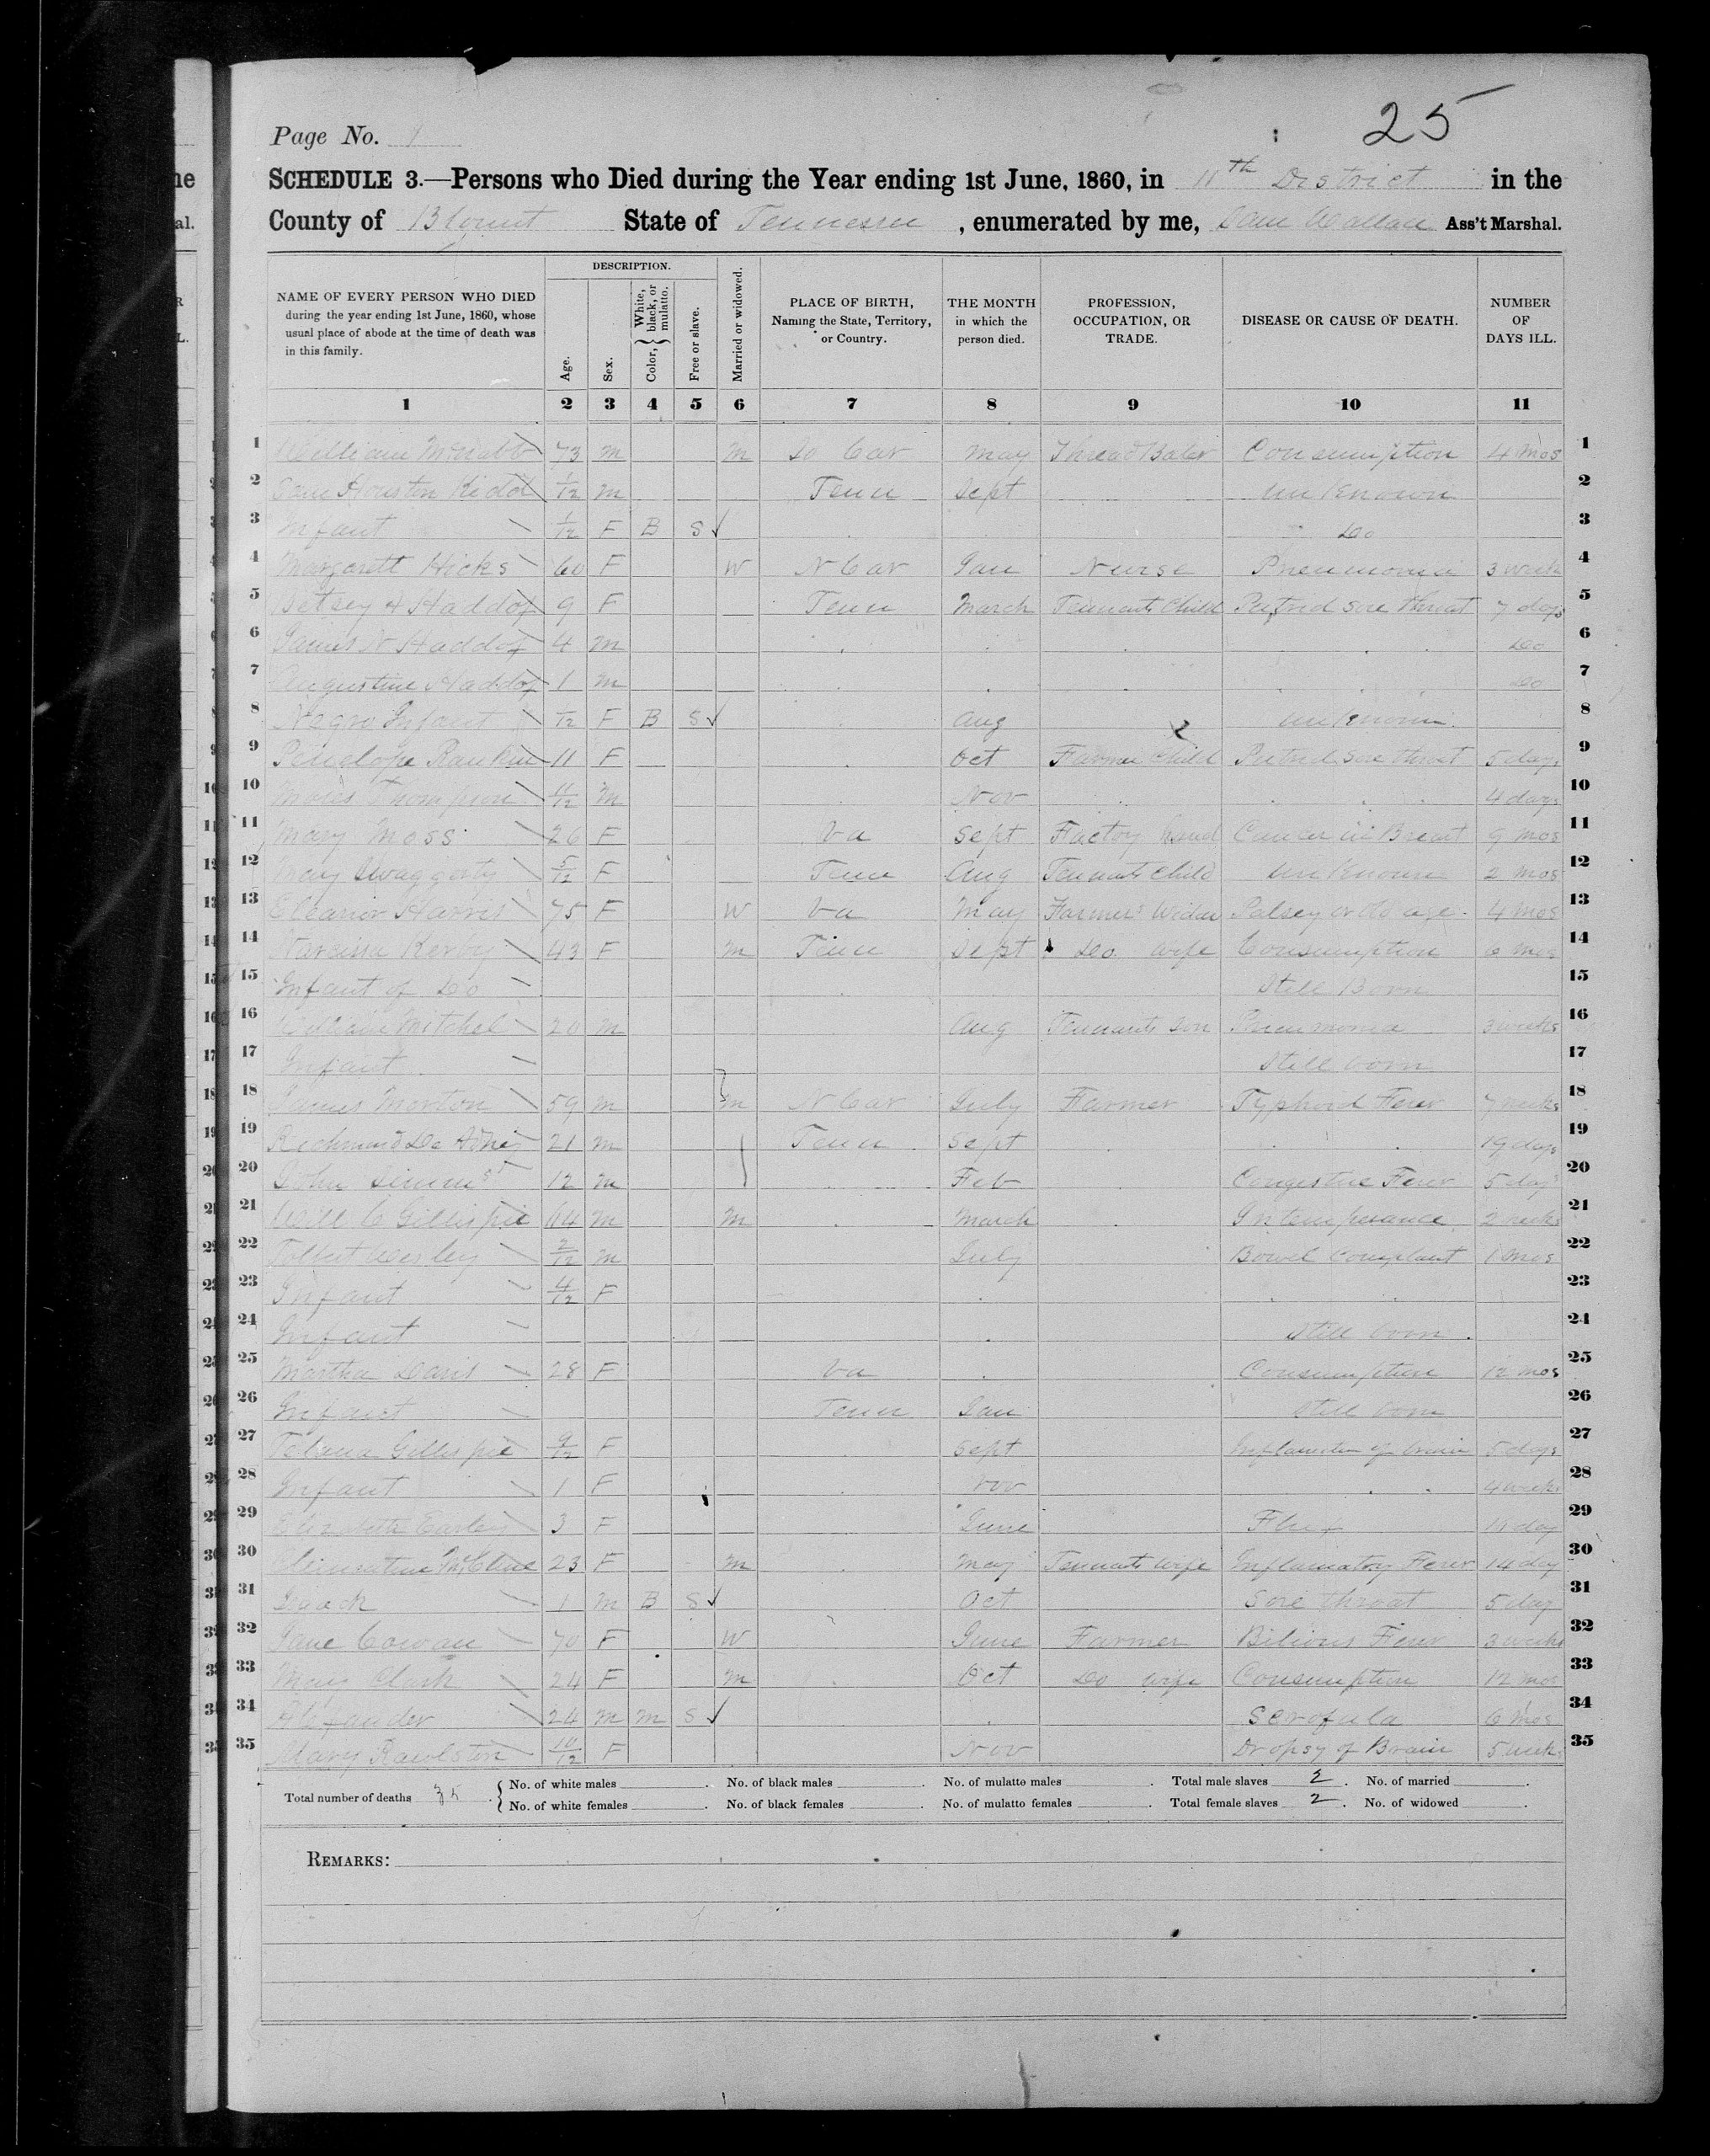 1860 Blount County Mortality Schedule Page 4